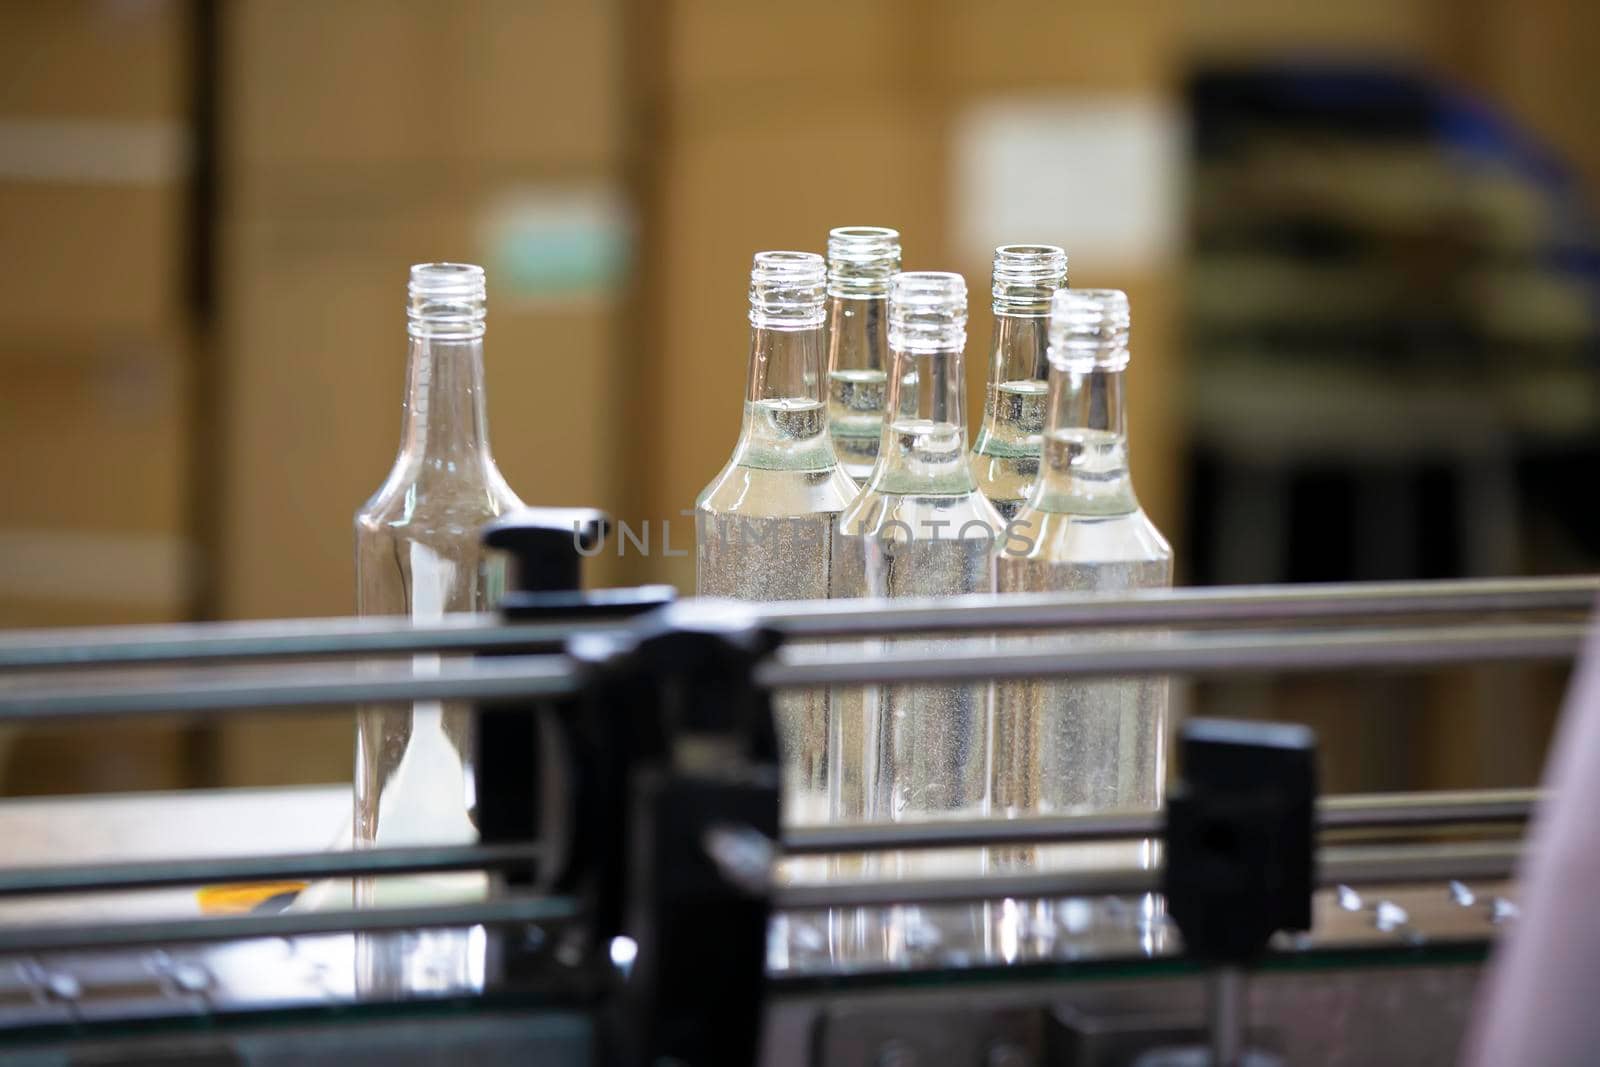 A row of glass bottles on a conveyor belt for the production of alcoholic beverages.